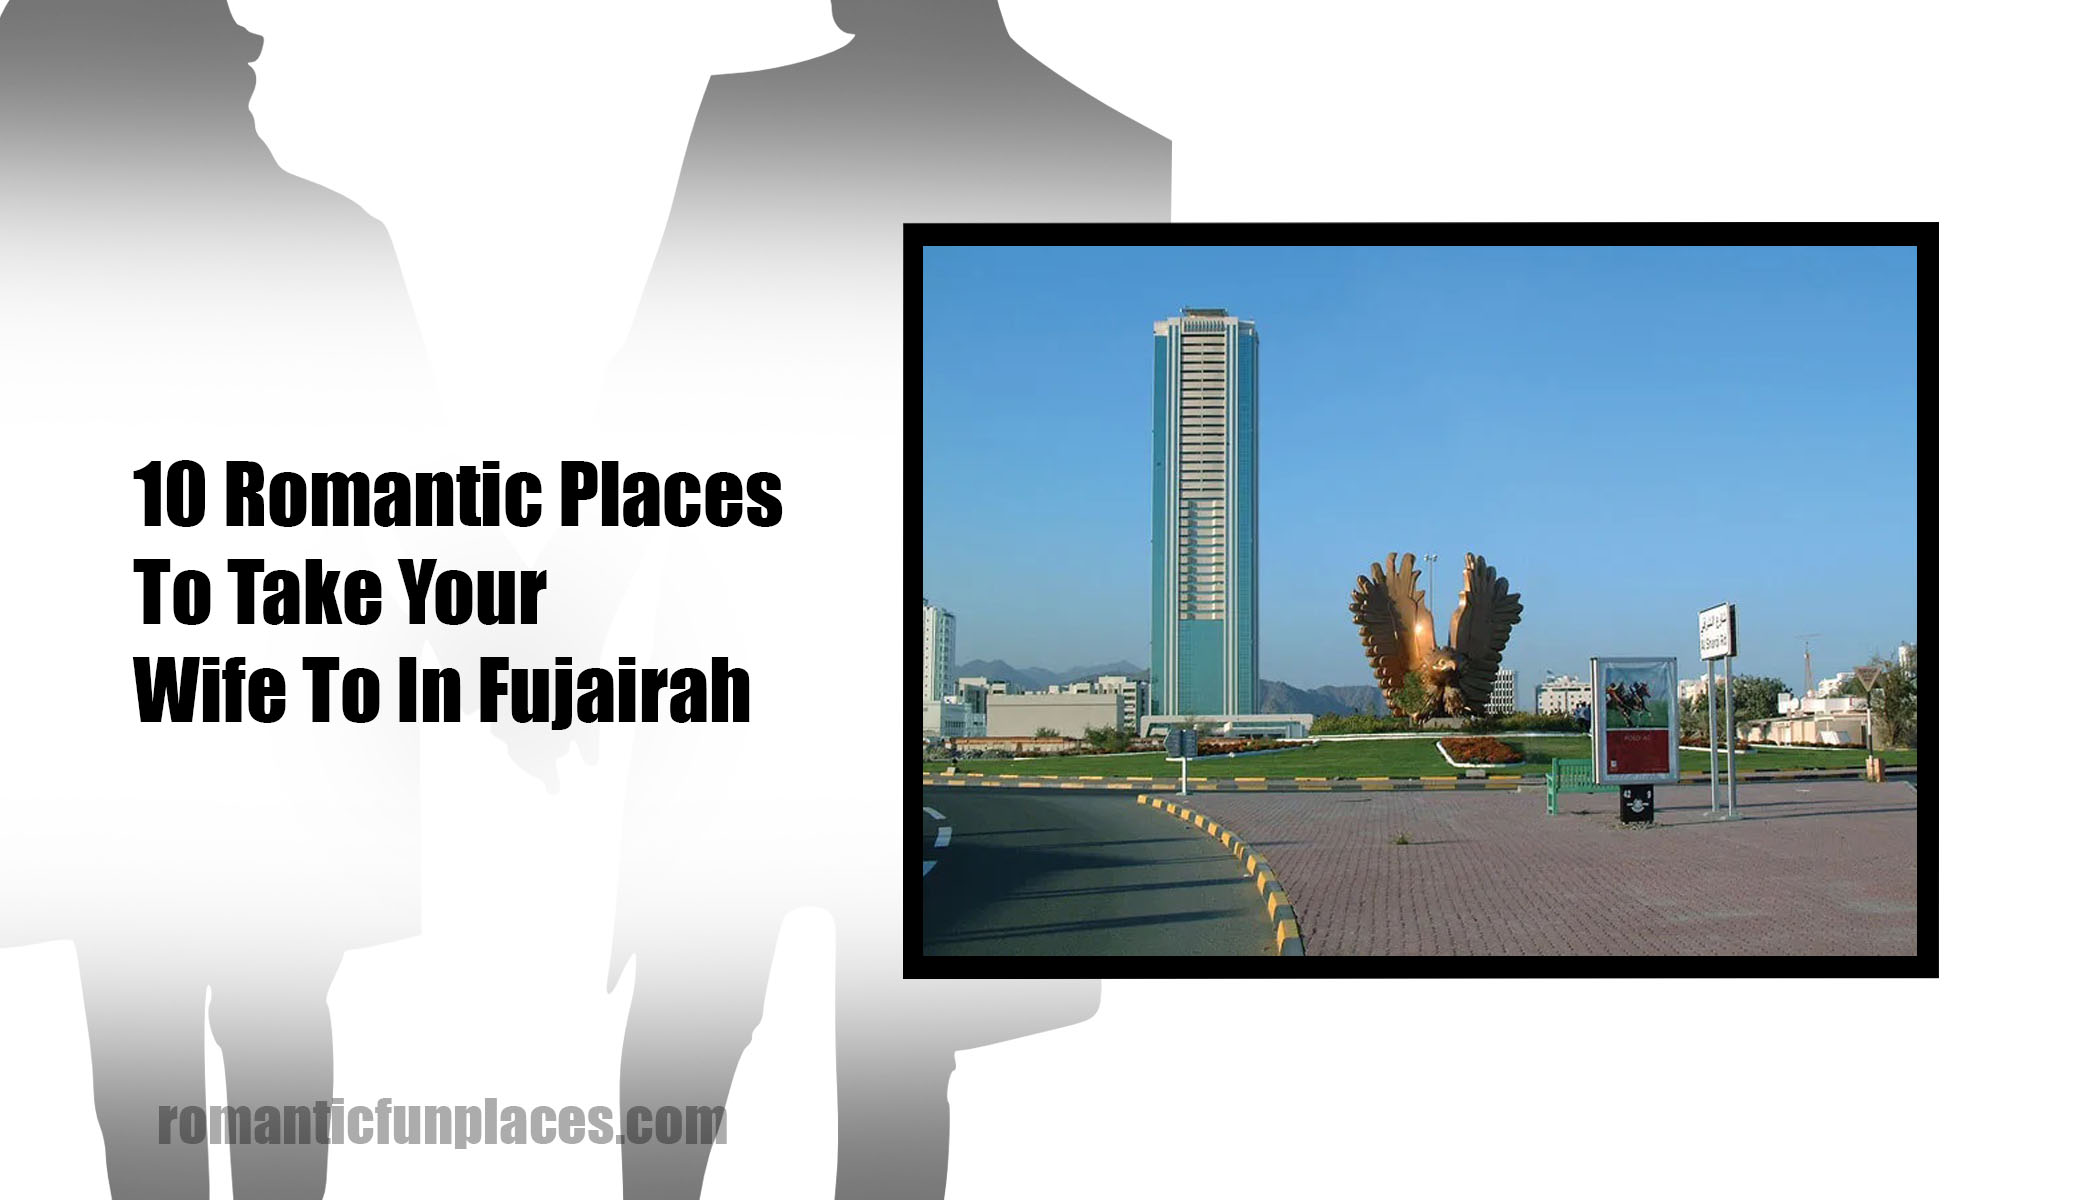 10 Romantic Places To Take Your Wife To In Fujairah